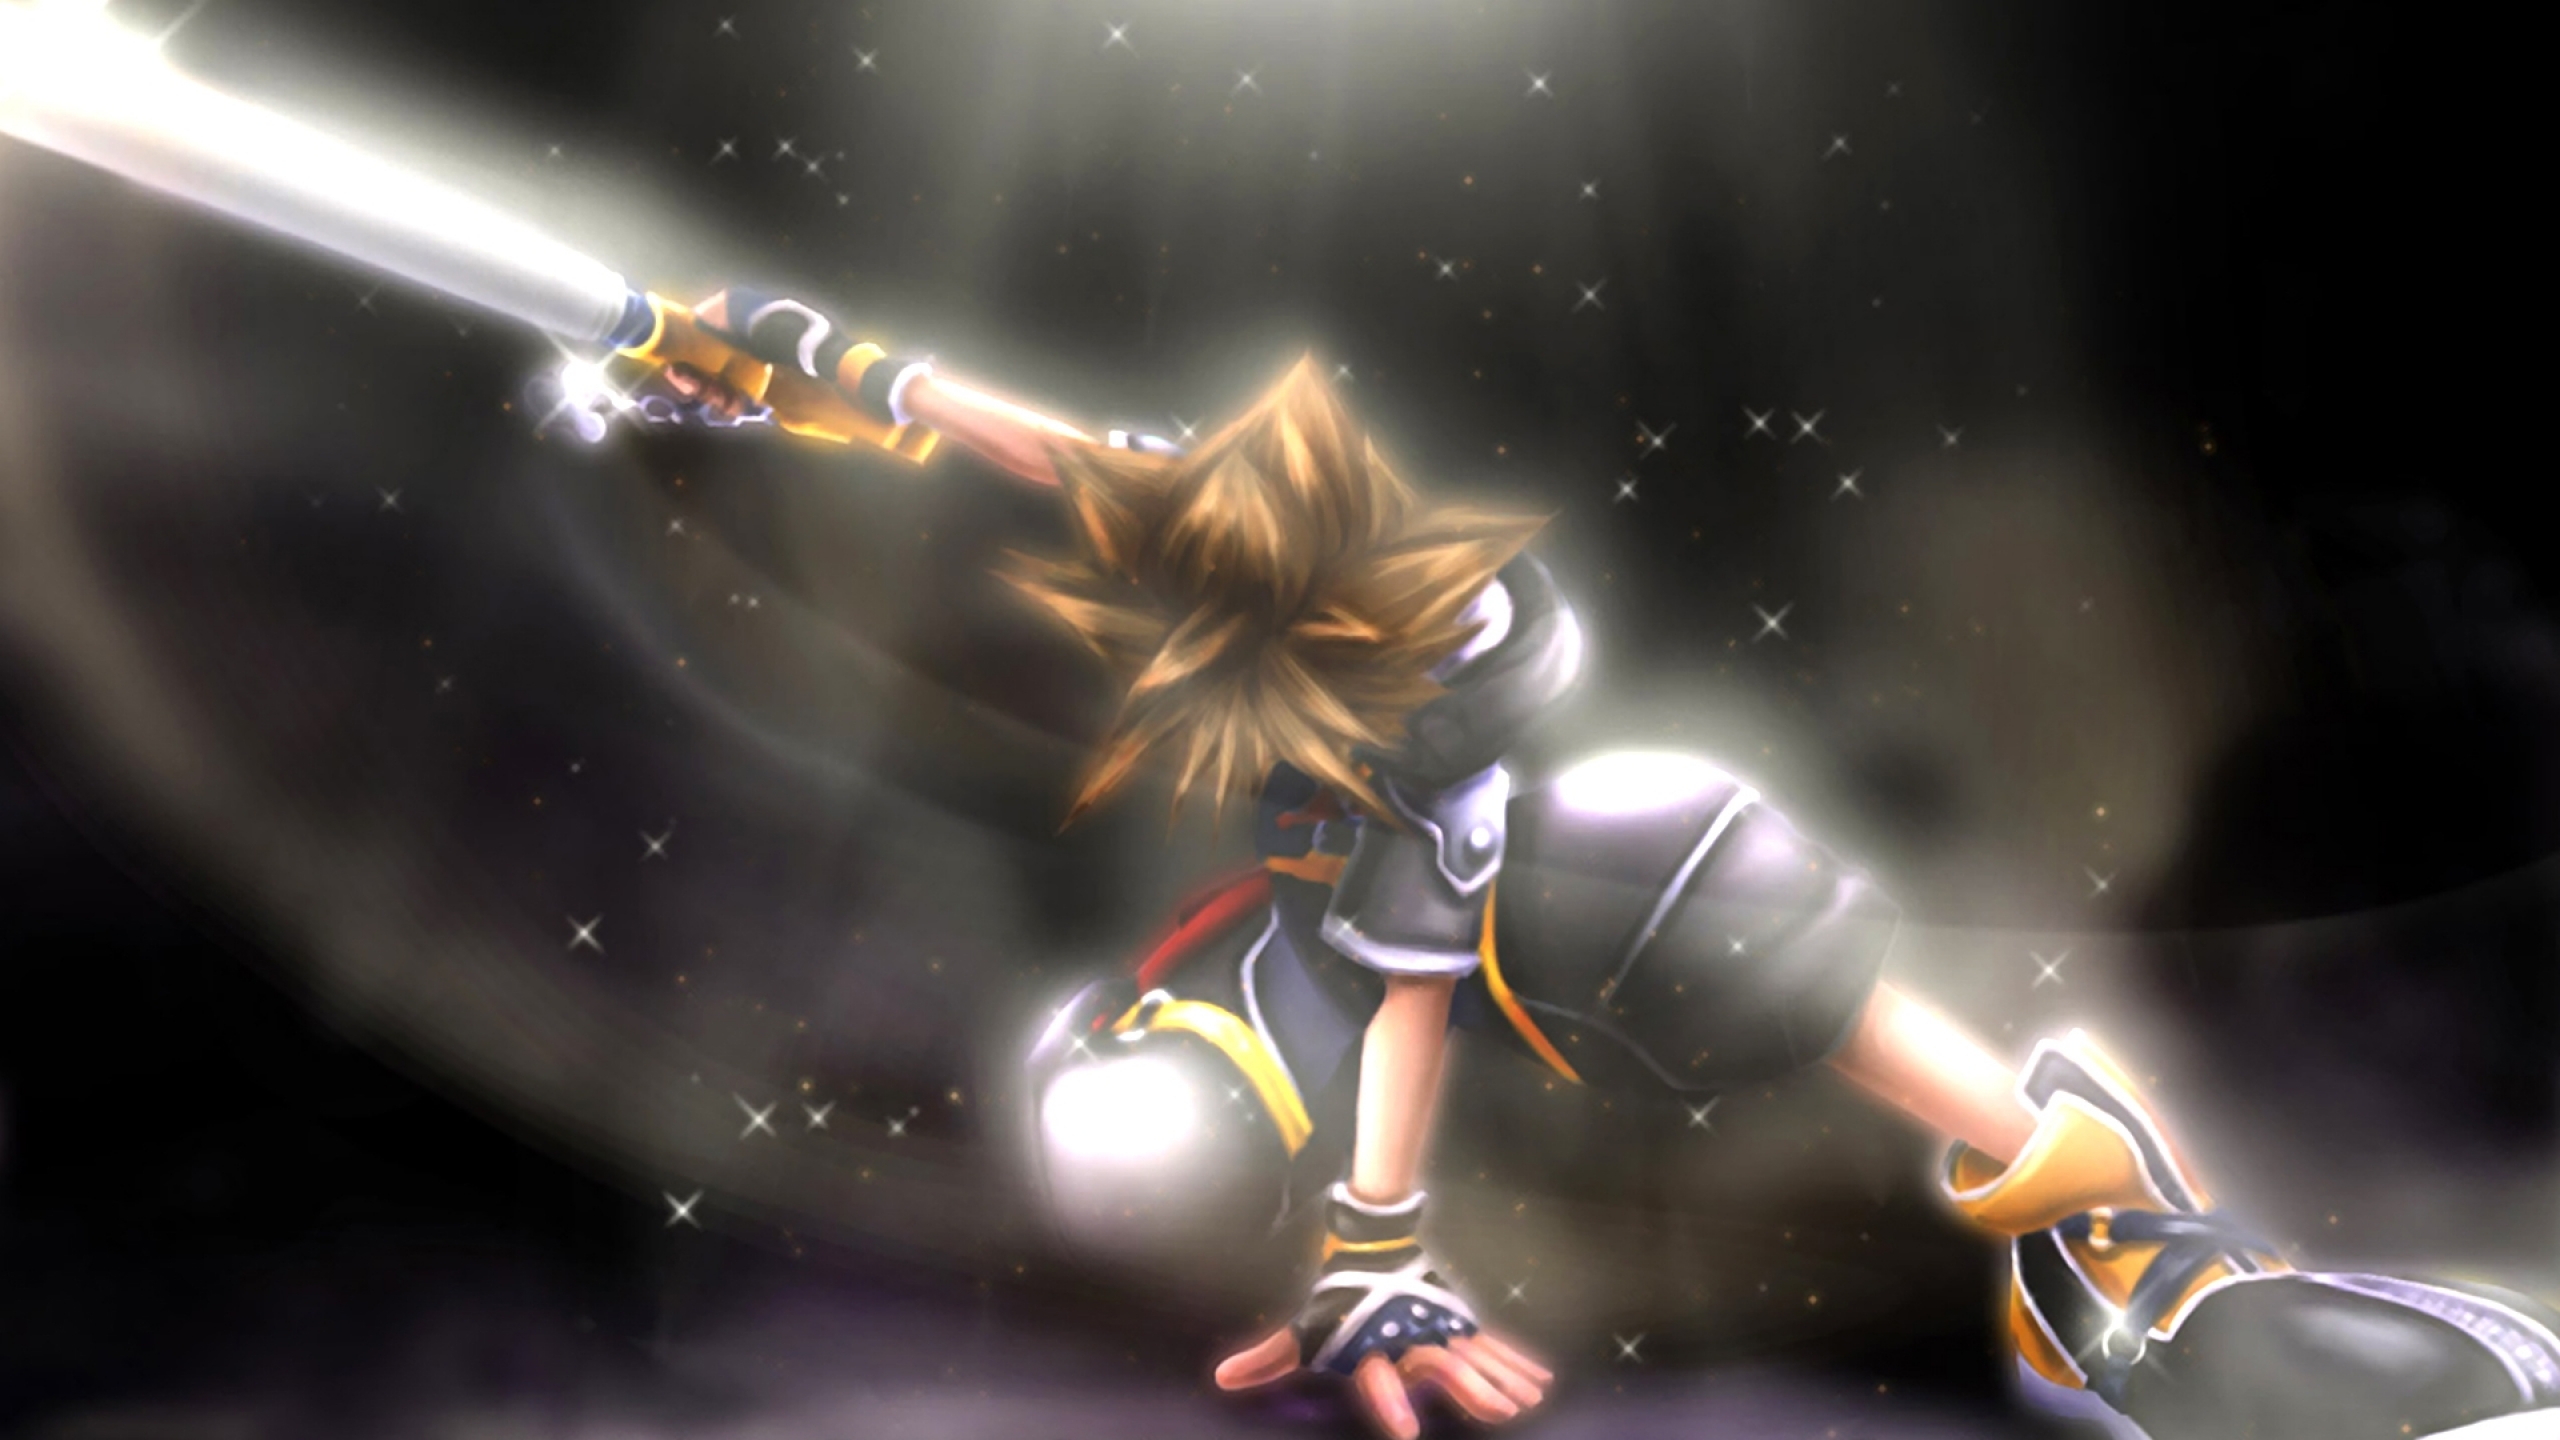 Free download Wallpapers Download 2560x1440 kingdom hearts 1920x1080